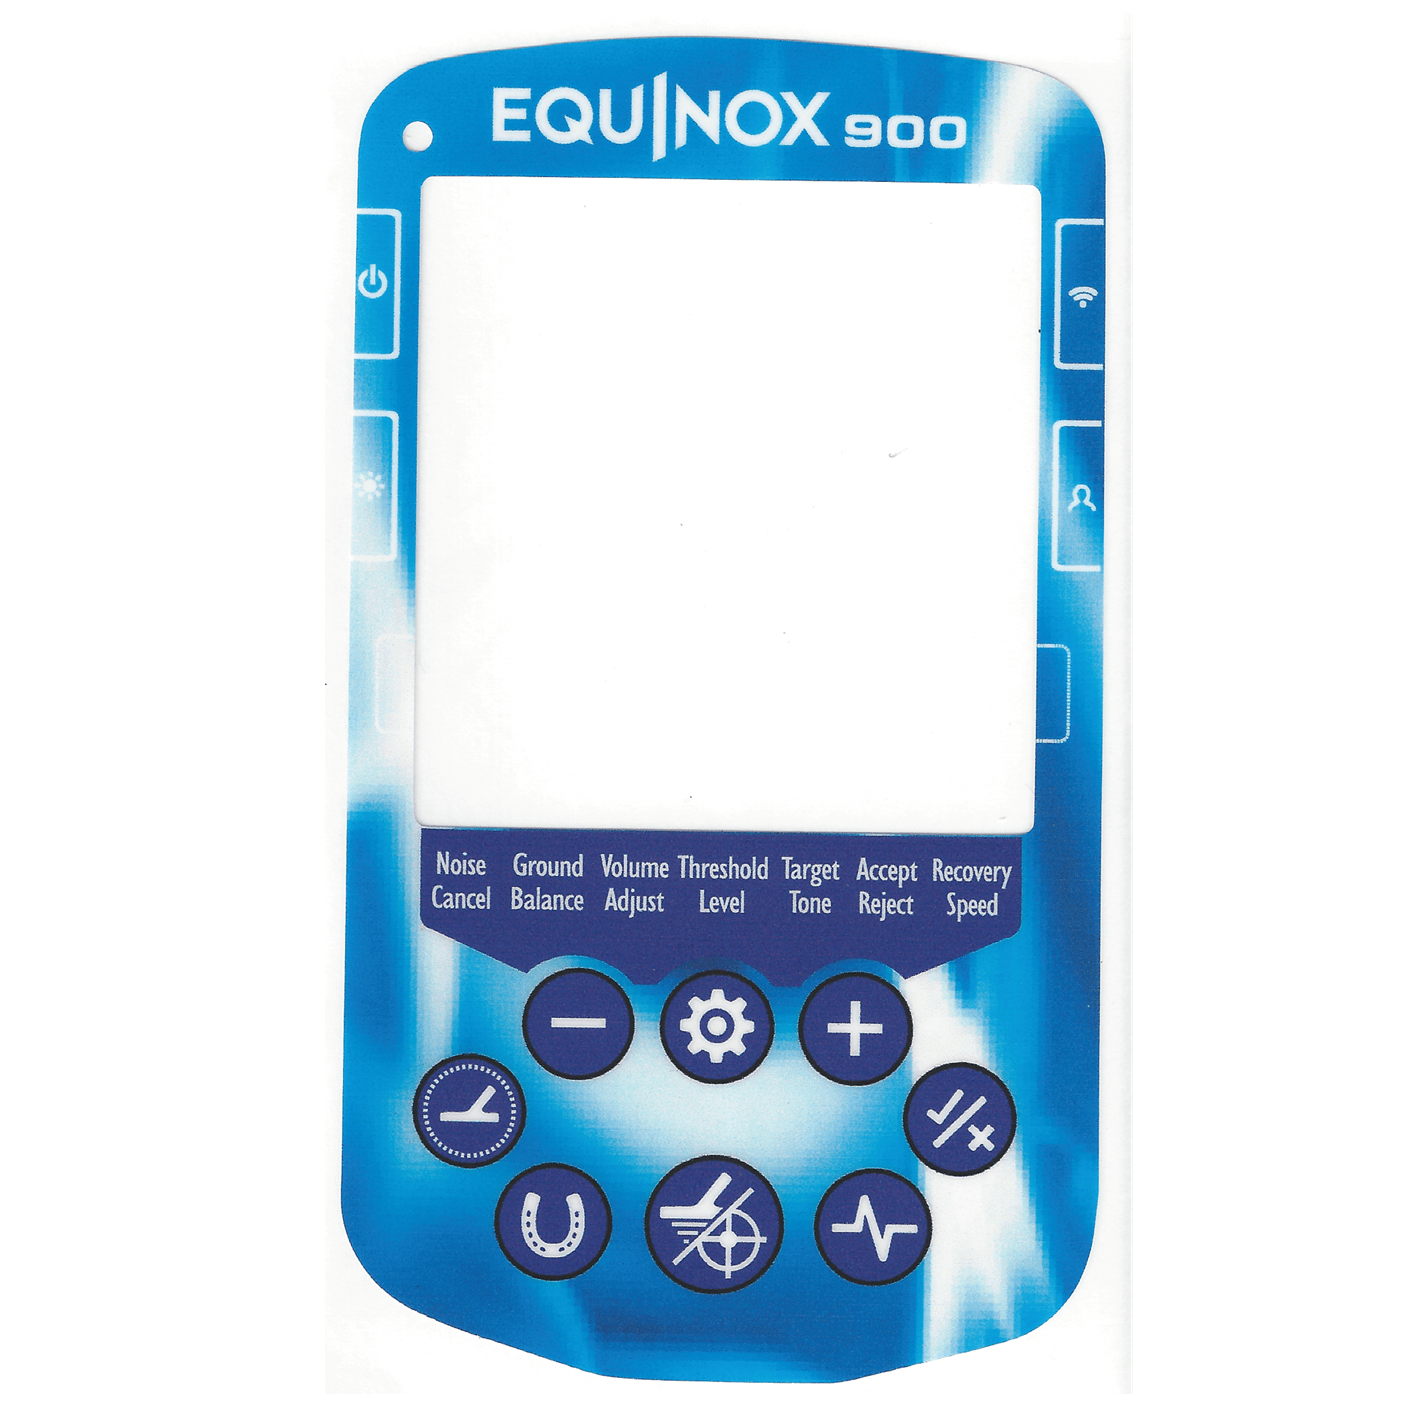 Detecting Innovations Keypad Stickers for the Minelab Equinox 900 Metal Detector- Multiple Colors Available!